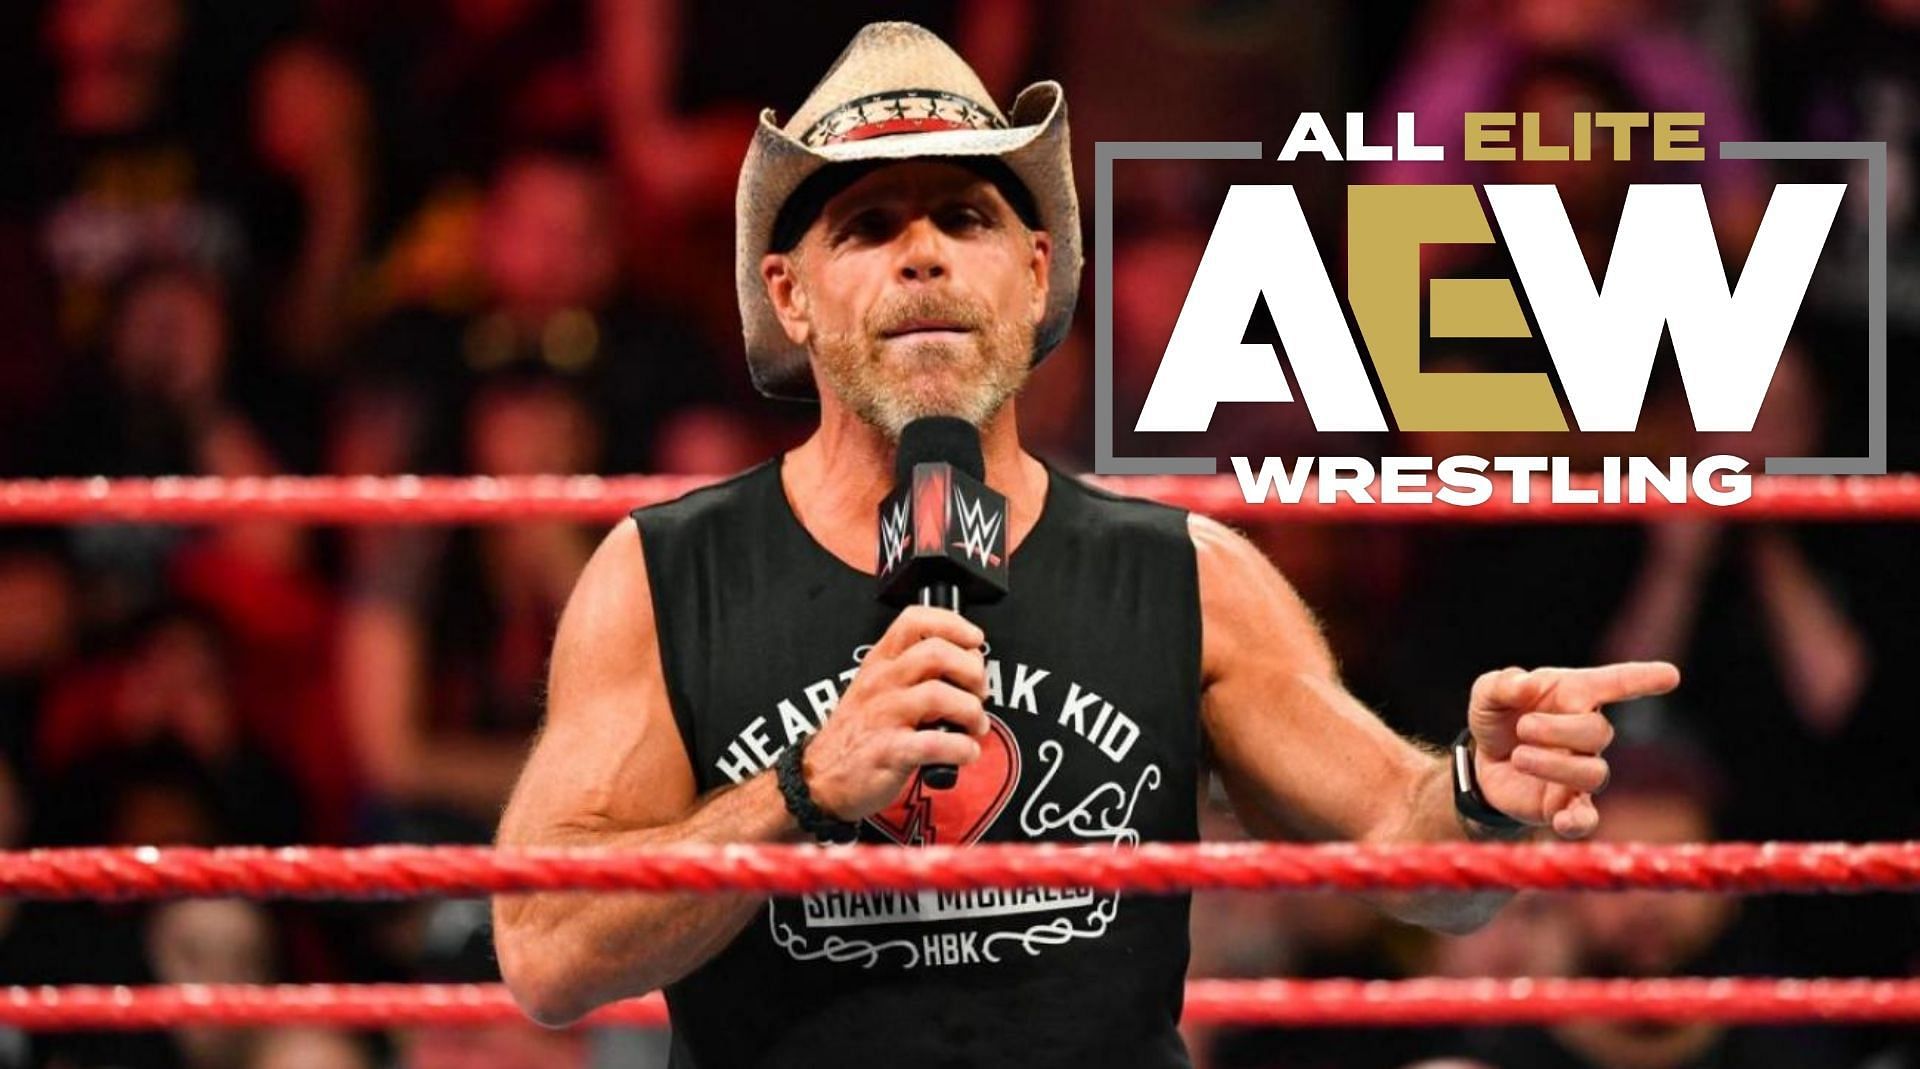 Shawn Michaels is a two-time WWE Hall of Famer.